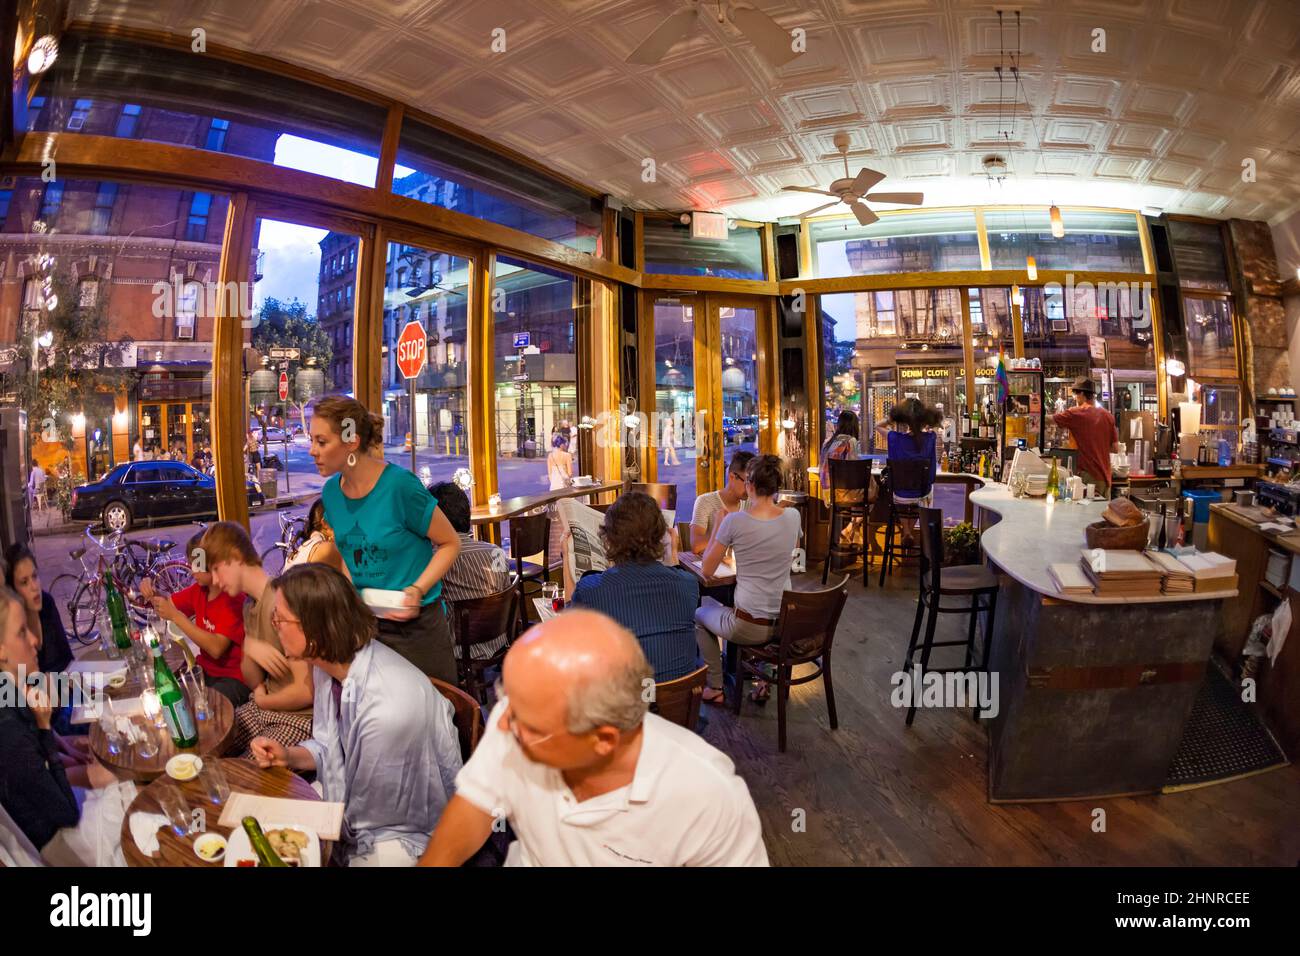 tourists and local people enjoy the restaurant at the Orchard stree Stock Photo